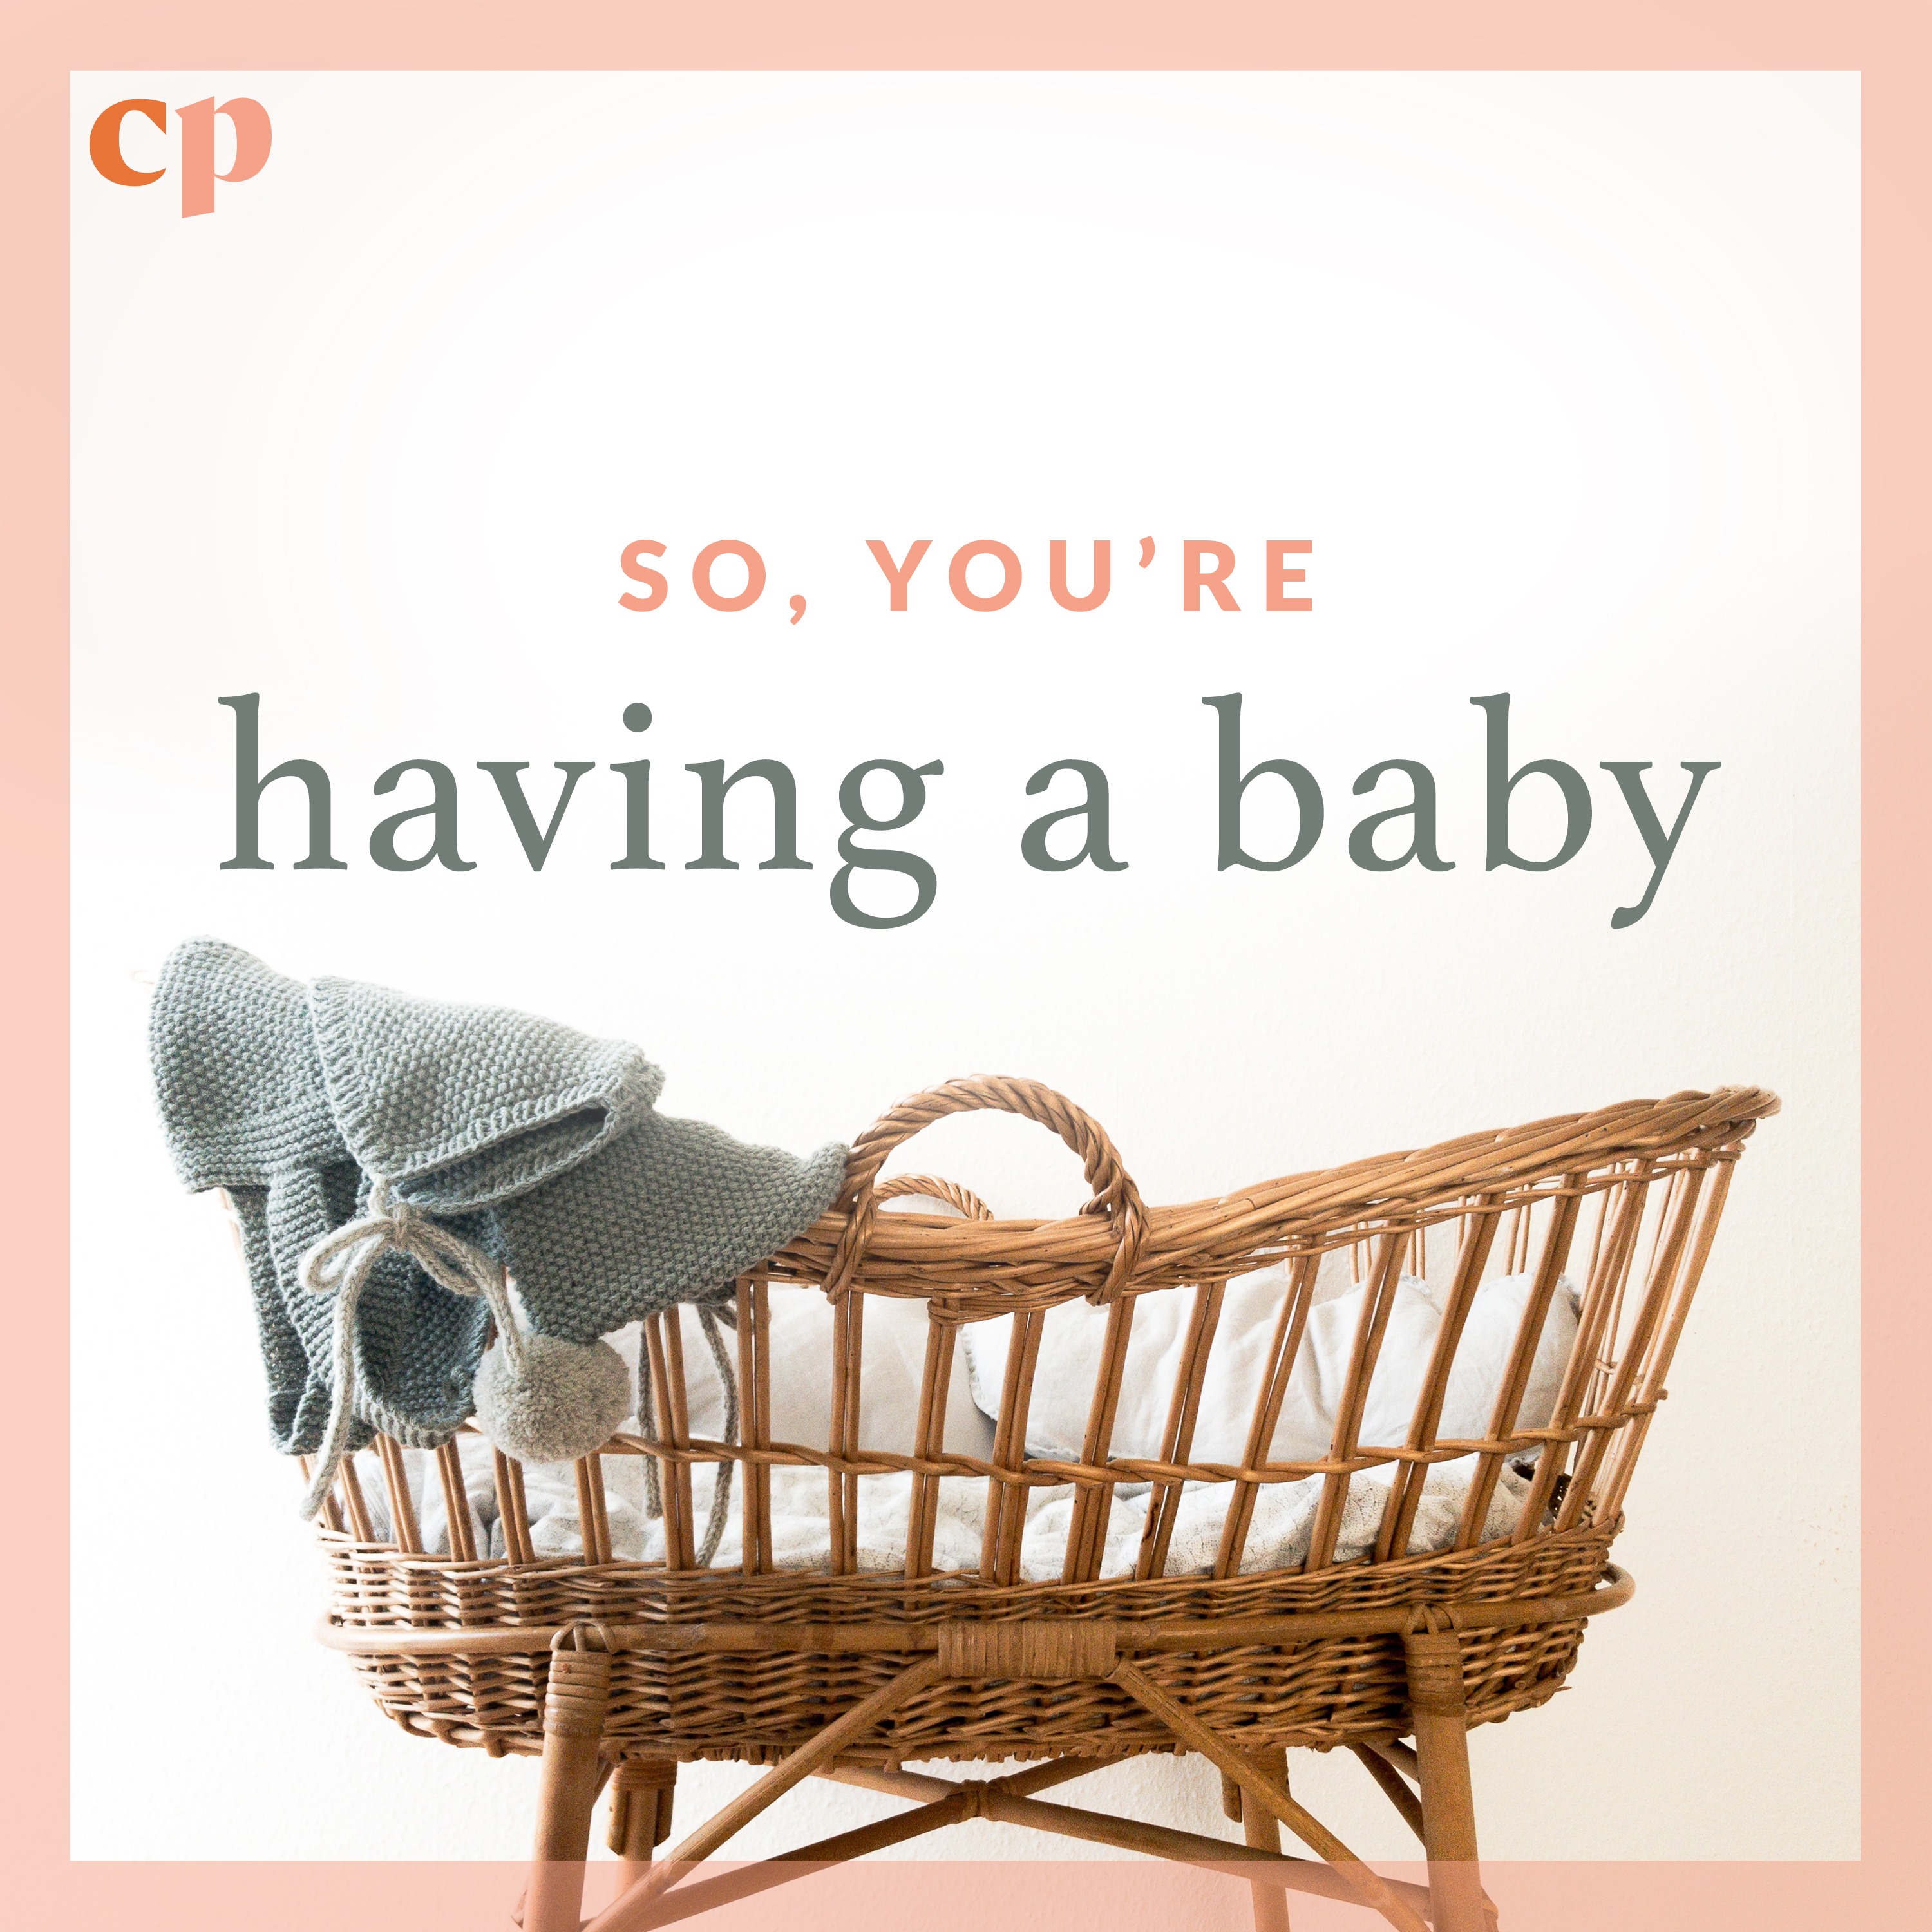 So, you're having a baby